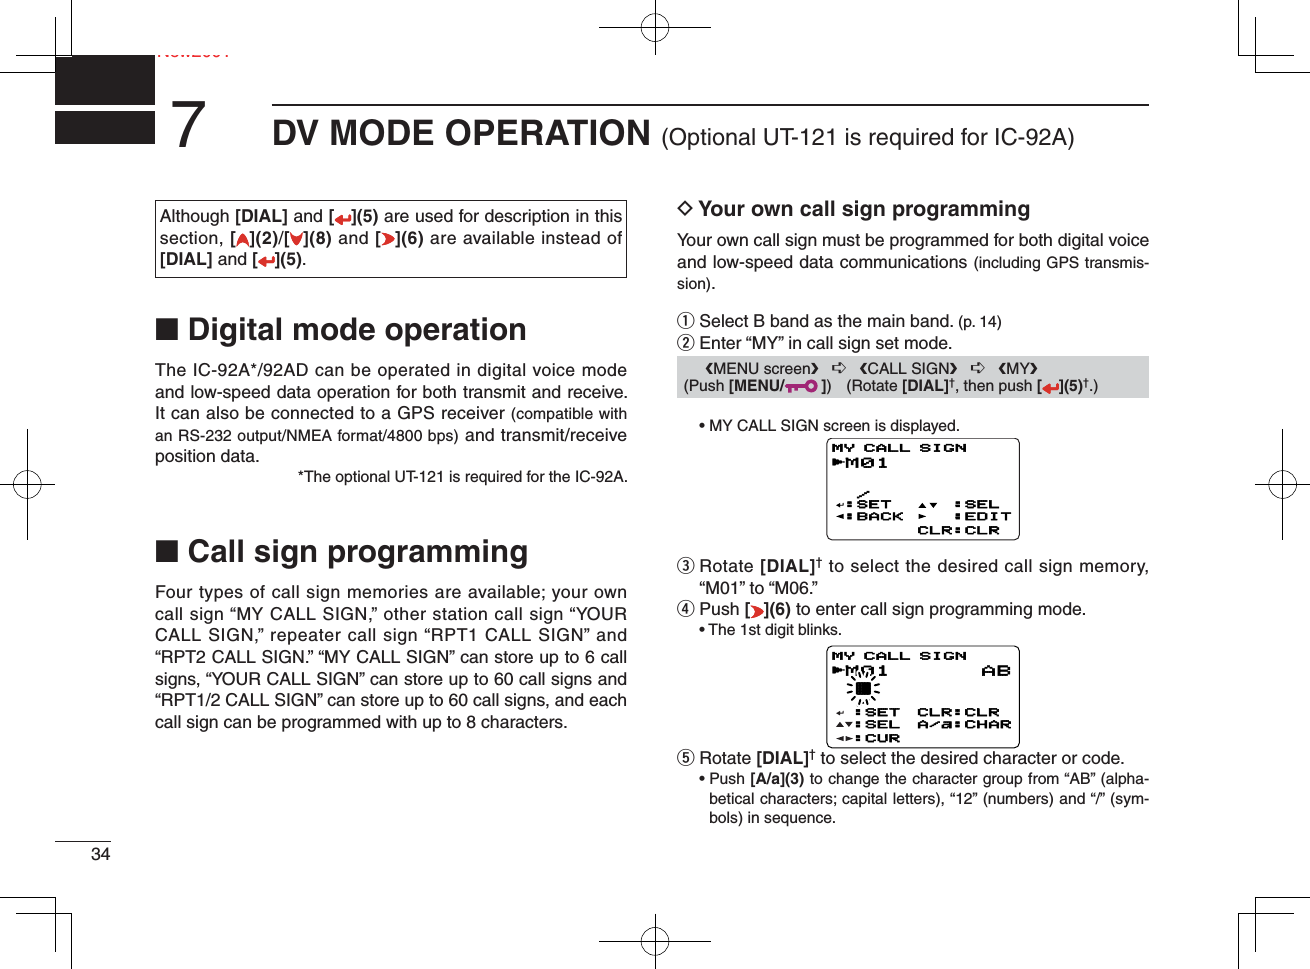 Ne34New2001DV MODE OPERATION (Optional UT-121 is required for IC-92A)7Although [DIAL] and [ ](5) are used for description in this section, [](2)/[](8) and [](6) are available instead of [DIAL] and [](5).■ Digital mode operationThe IC-92A*/92AD can be operated in digital voice mode and low-speed data operation for both transmit and receive. It can also be connected to a GPS receiver (compatible with an RS-232 output/NMEA format/4800 bps) and transmit/receive position data.*The optional UT-121 is required for the IC-92A.■ Call sign programmingFour types of call sign memories are available; your own call sign “MY CALL SIGN,” other station call sign “YOUR CALL SIGN,” repeater call sign “RPT1 CALL SIGN” and “RPT2 CALL SIGN.” “MY CALL SIGN” can store up to 6 call signs, “YOUR CALL SIGN” can store up to 60 call signs and “RPT1/2 CALL SIGN” can store up to 60 call signs, and each call sign can be programmed with up to 8 characters.D Your own call sign programmingYour own call sign must be programmed for both digital voice and low-speed data communications (including GPS transmis-sion).q Select B band as the main band. (p. 14)w Enter “MY” in call sign set mode.  • MY CALL SIGN screen is displayed.e  Rotate [DIAL]† to select the desired call sign memory, “M01” to “M06.” r Push [](6) to enter call sign programming mode.  • The 1st digit blinks.t  Rotate [DIAL]† to select the desired character or code. •  Push [A/a](3) to change the character group from “AB” (alpha-betical characters; capital letters), “12” (numbers) and “/” (sym-bols) in sequence.M01  /:SET:BACK:SEL:EDITCLR:CLRMY CALL SIGNrM01 † /MY CALL SIGNr:SET:SEL:CURCLR:CLRA/a:CHARAB      ❮MENU screen❯   ➪   ❮CALL SIGN❯   ➪   ❮MY❯ (Push [MENU/ ]) (Rotate [DIAL]†, then push [ ](5)†.)